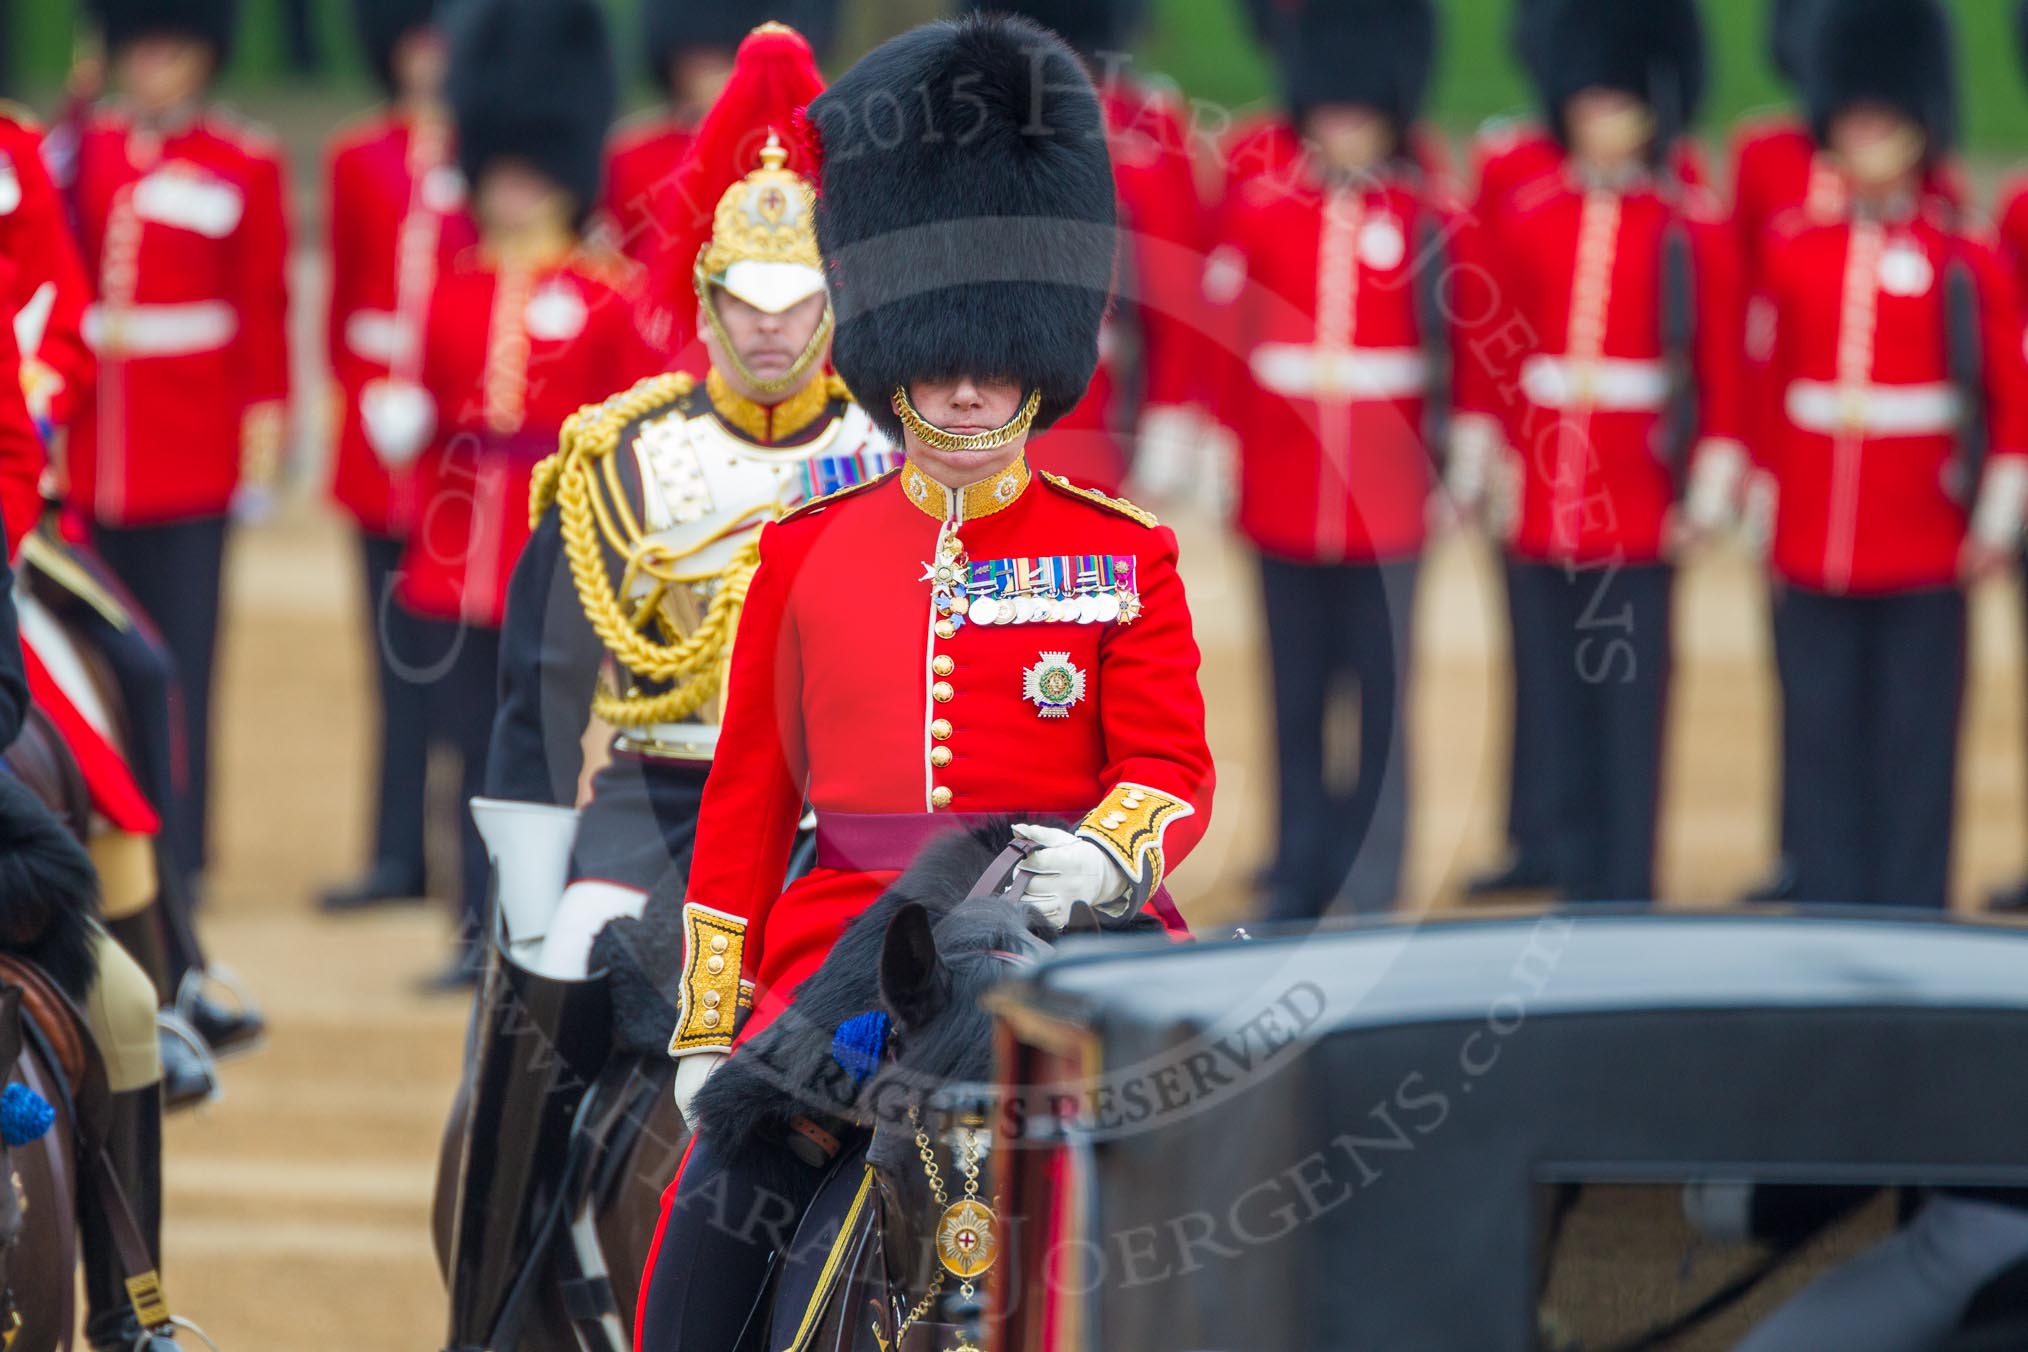 The Colonel's Review 2016.
Horse Guards Parade, Westminster,
London,

United Kingdom,
on 04 June 2016 at 11:05, image #208